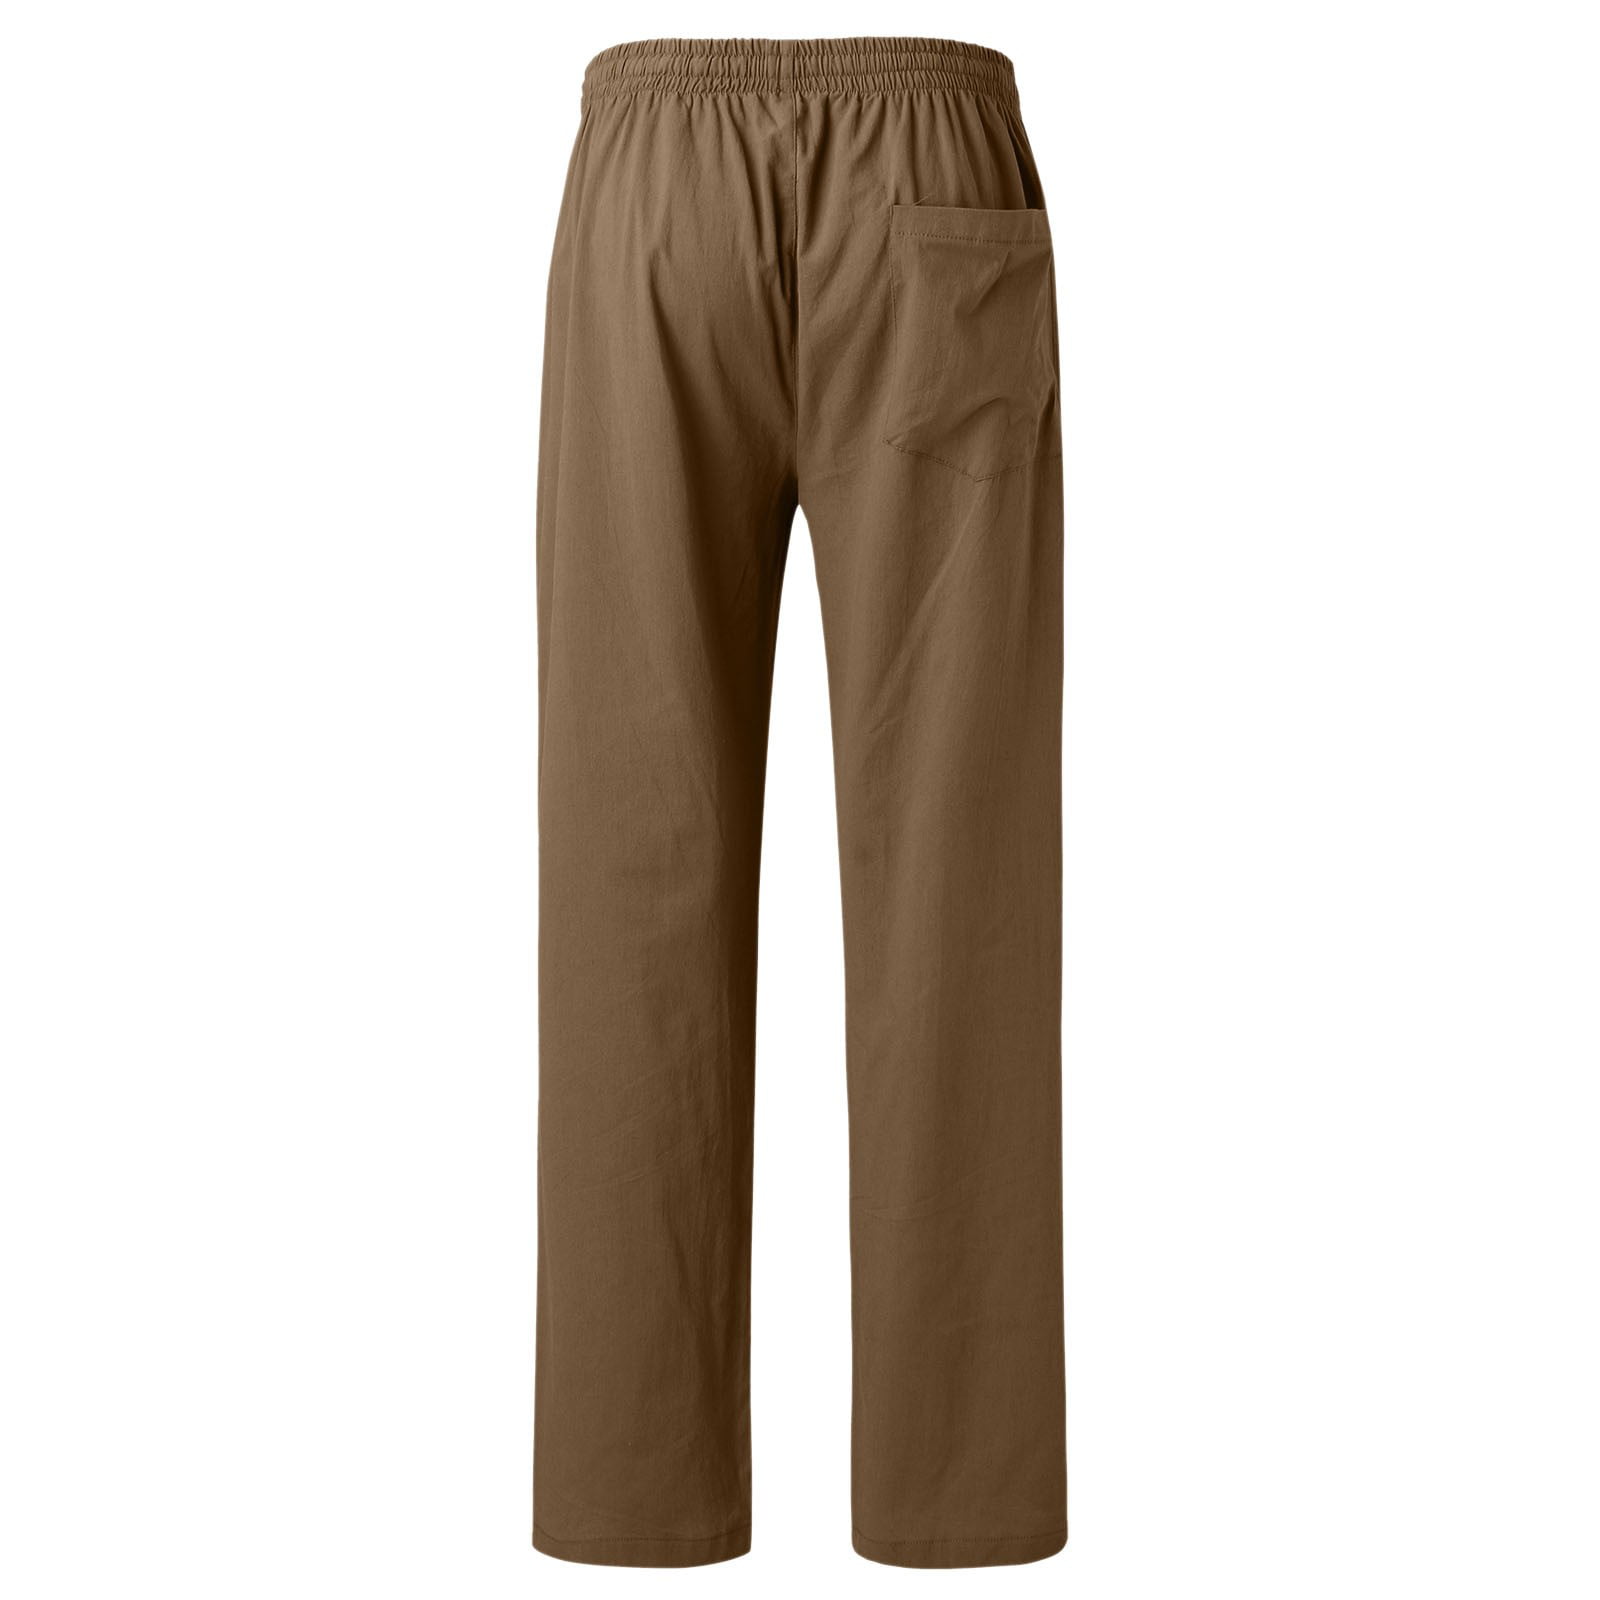 Brown Cargo Pants For Men Men Spring And Summer Pant Casual All